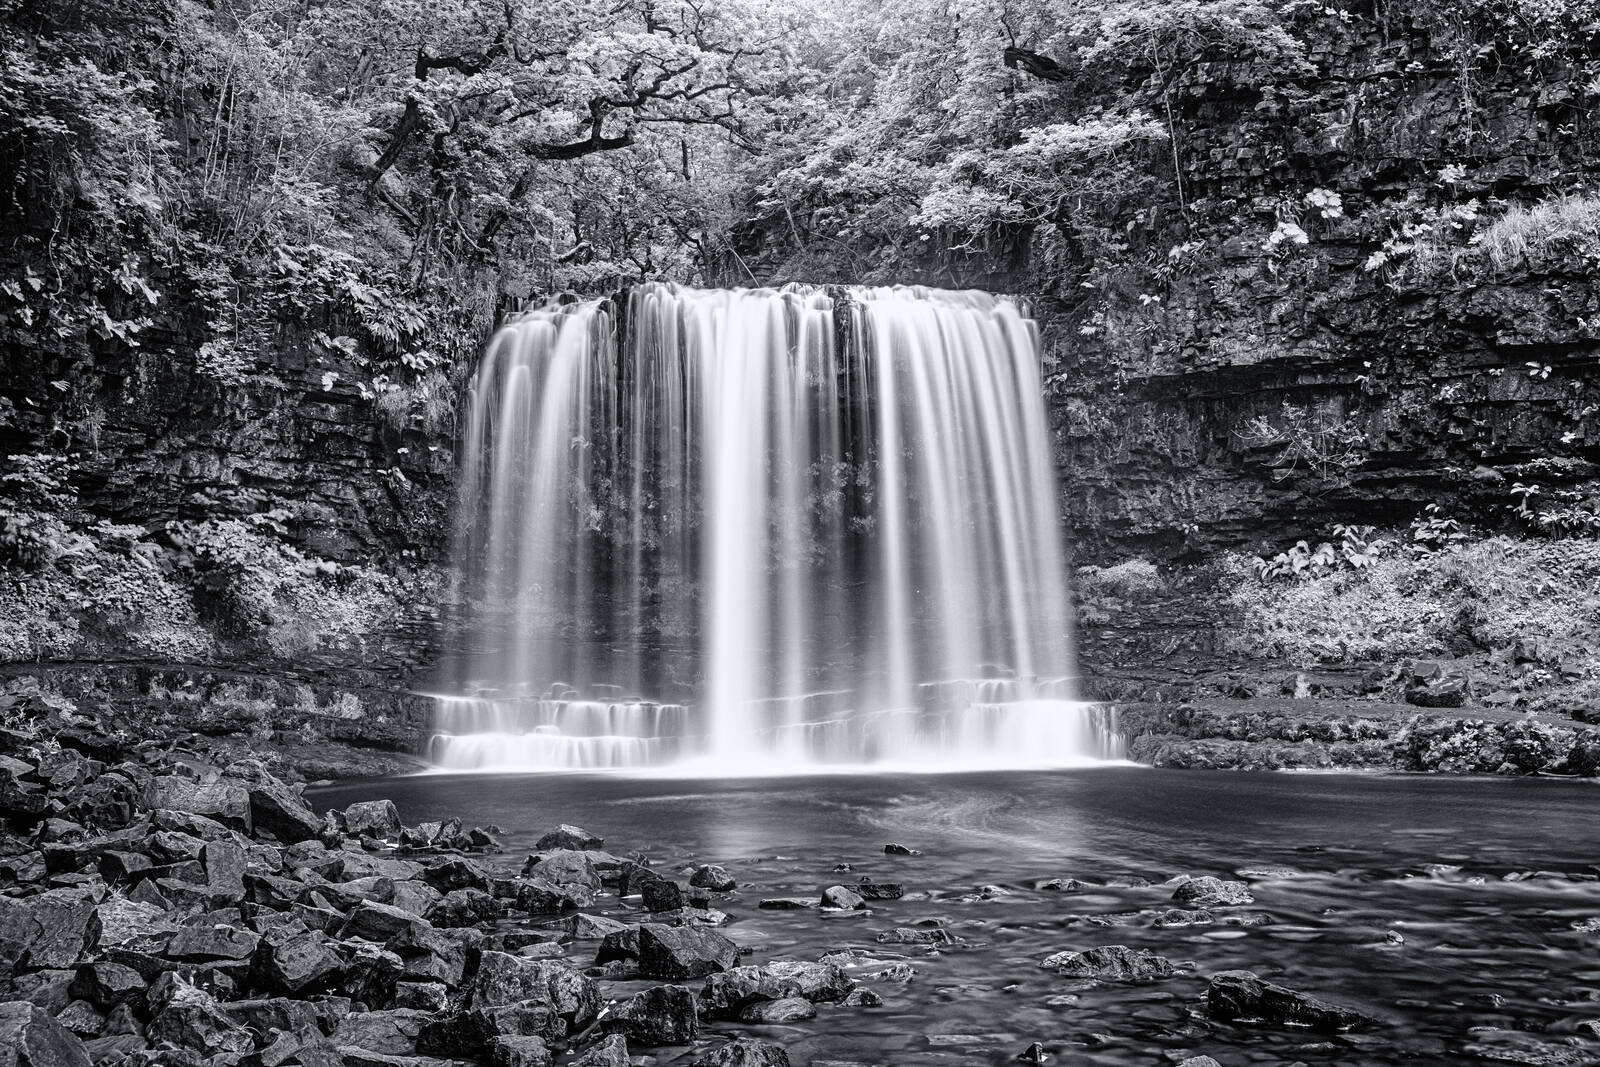 Image of Four Falls by Andreas Marjoram